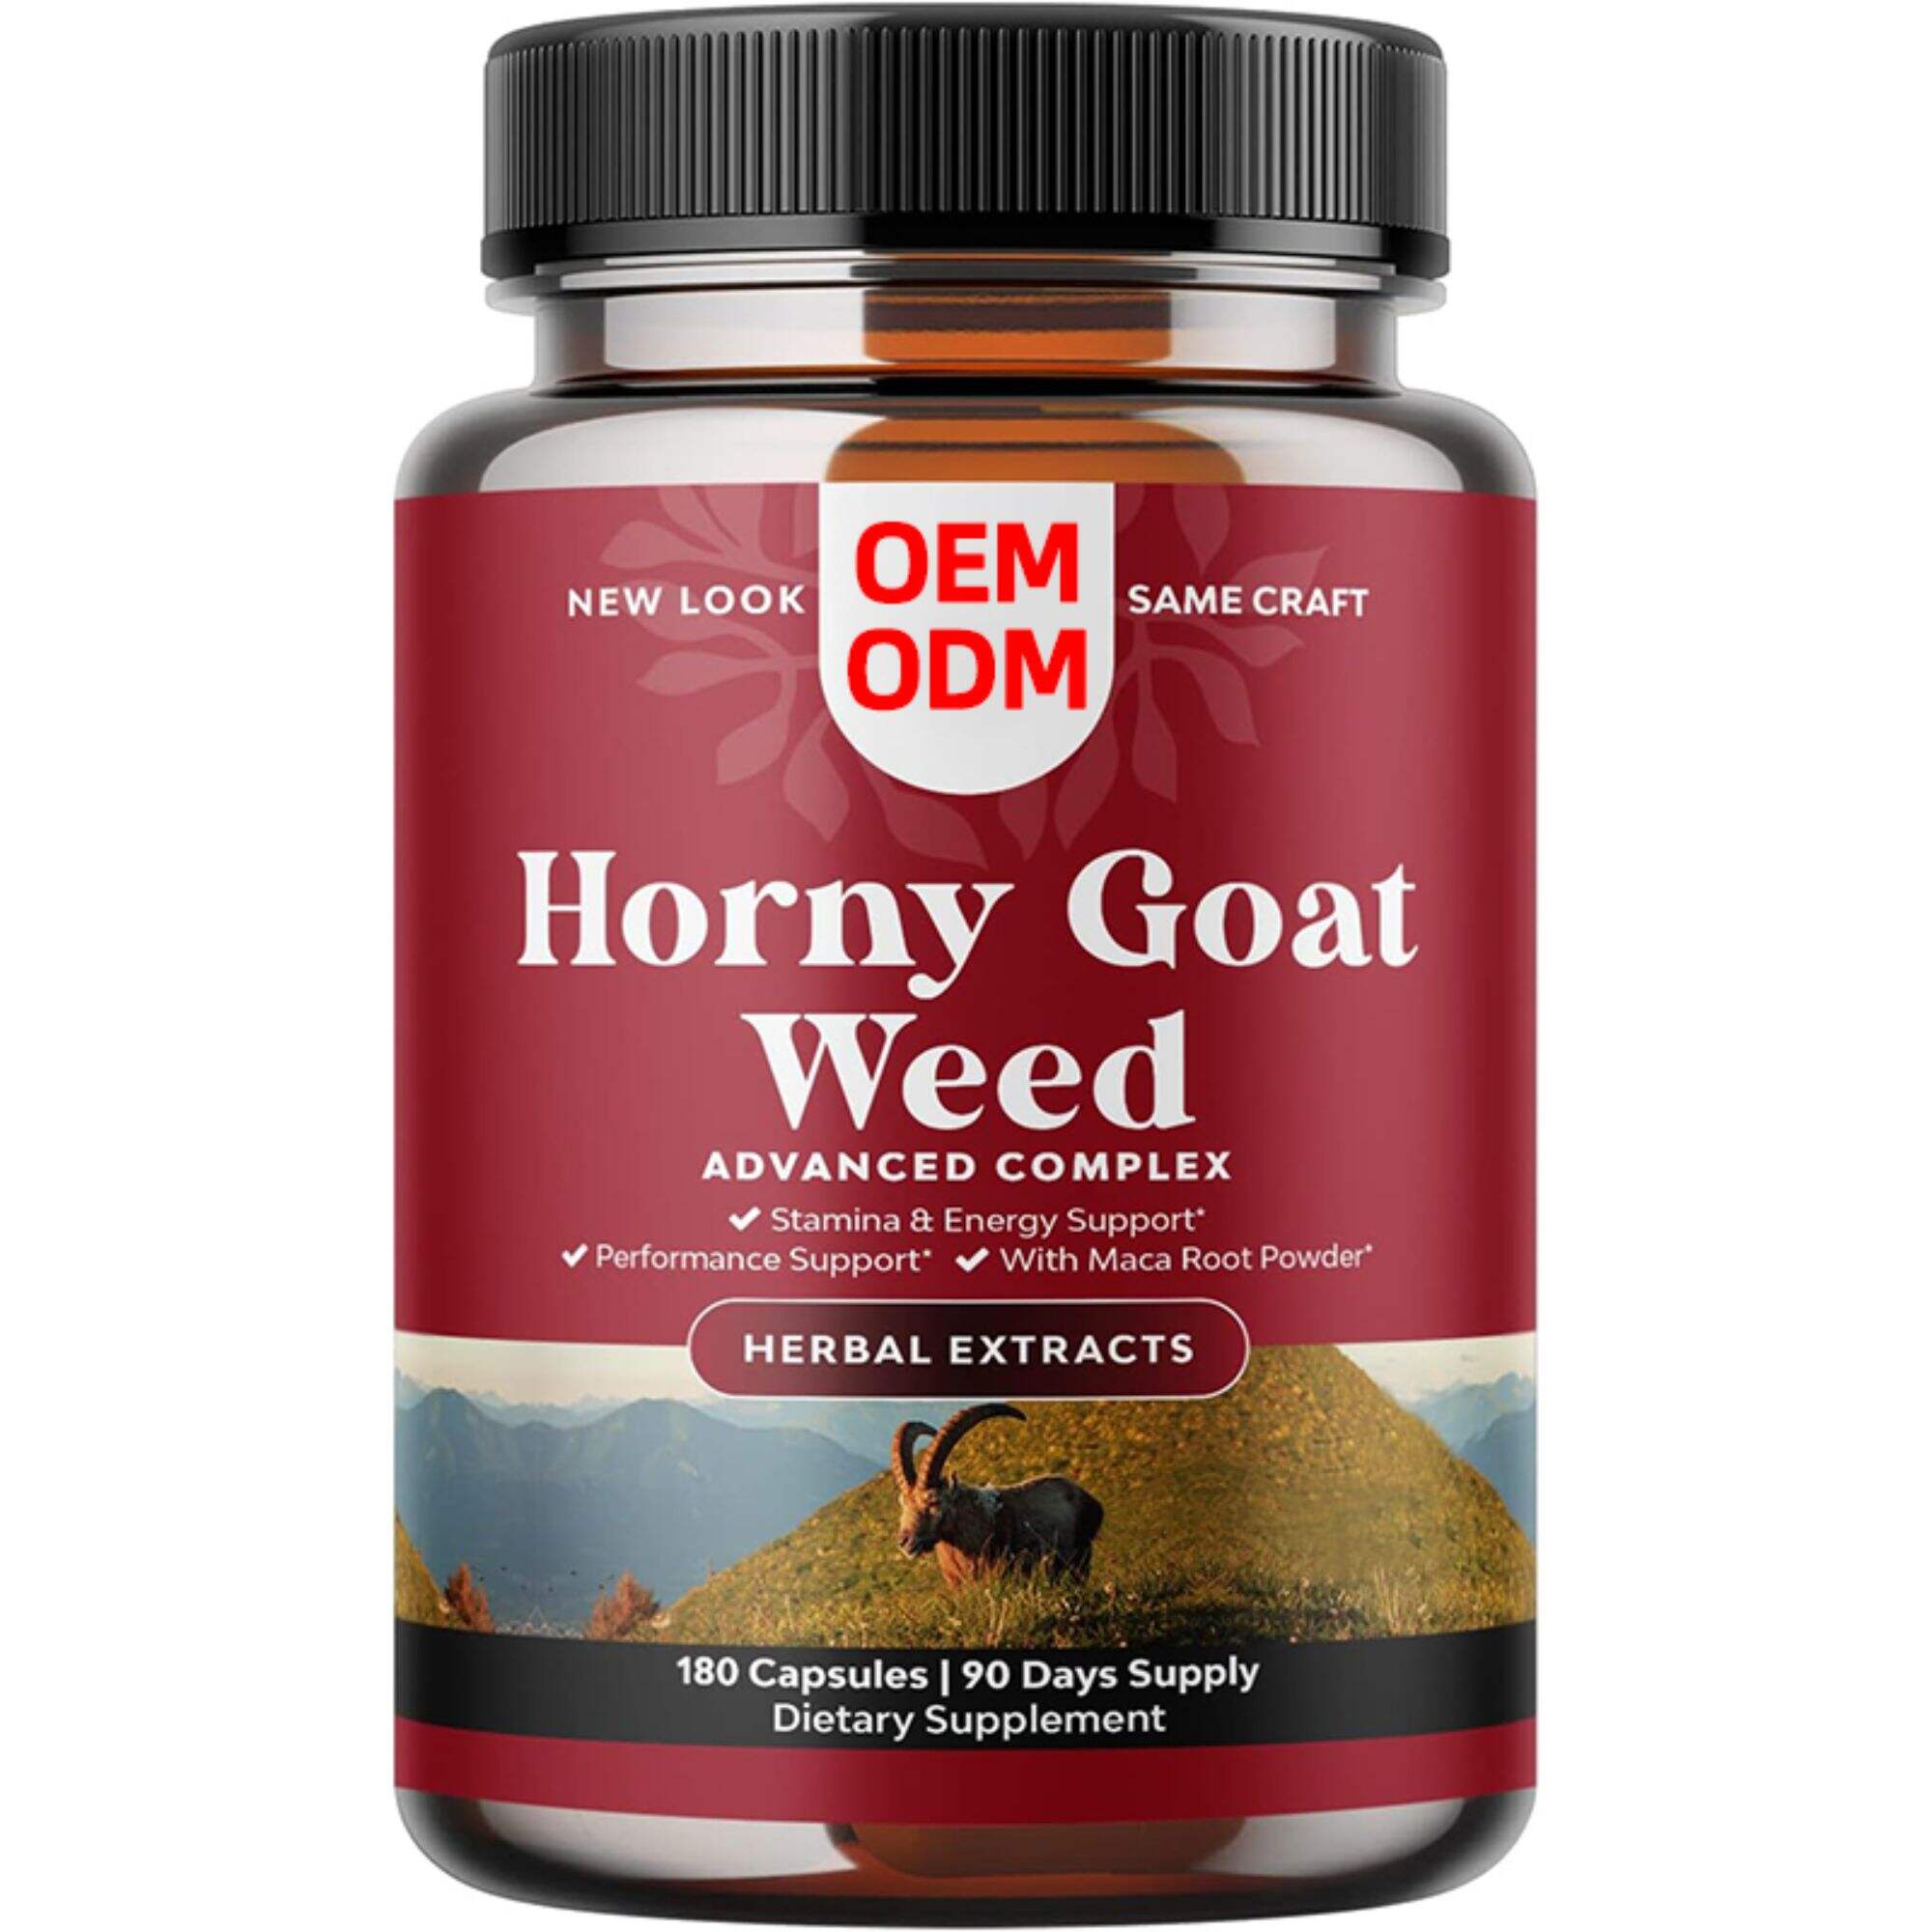 Horny Goat Weed for Male Enhancement - Extra Strength Horny Goat Weed for Men 1590mg per serving Complex with Tongkat Ali Saw Palmetto Extract Panax Ginseng and Black Maca Root for Stamina & Energy